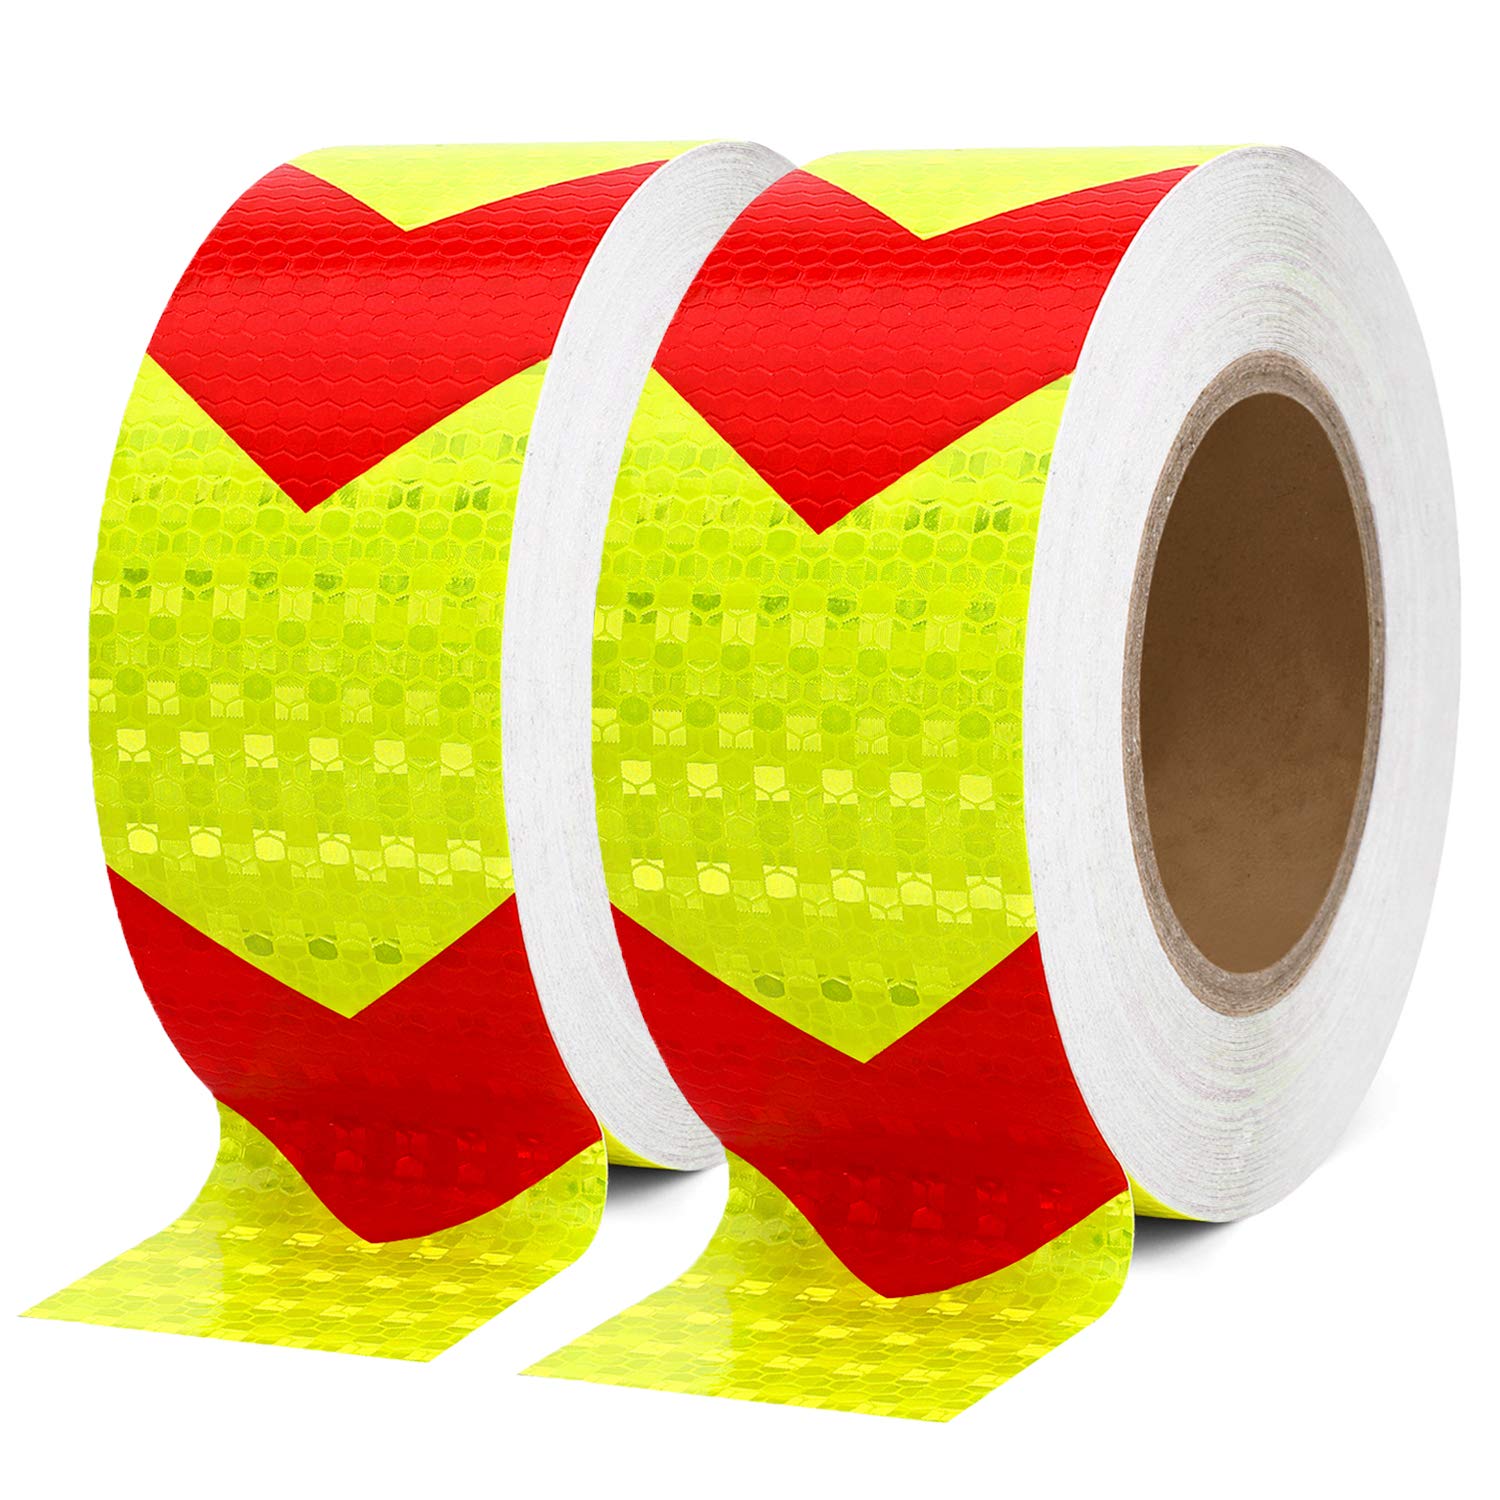 Red Yellow Arrow Adheisve Reflective Safety Caution Conspicuity Warning Tapes